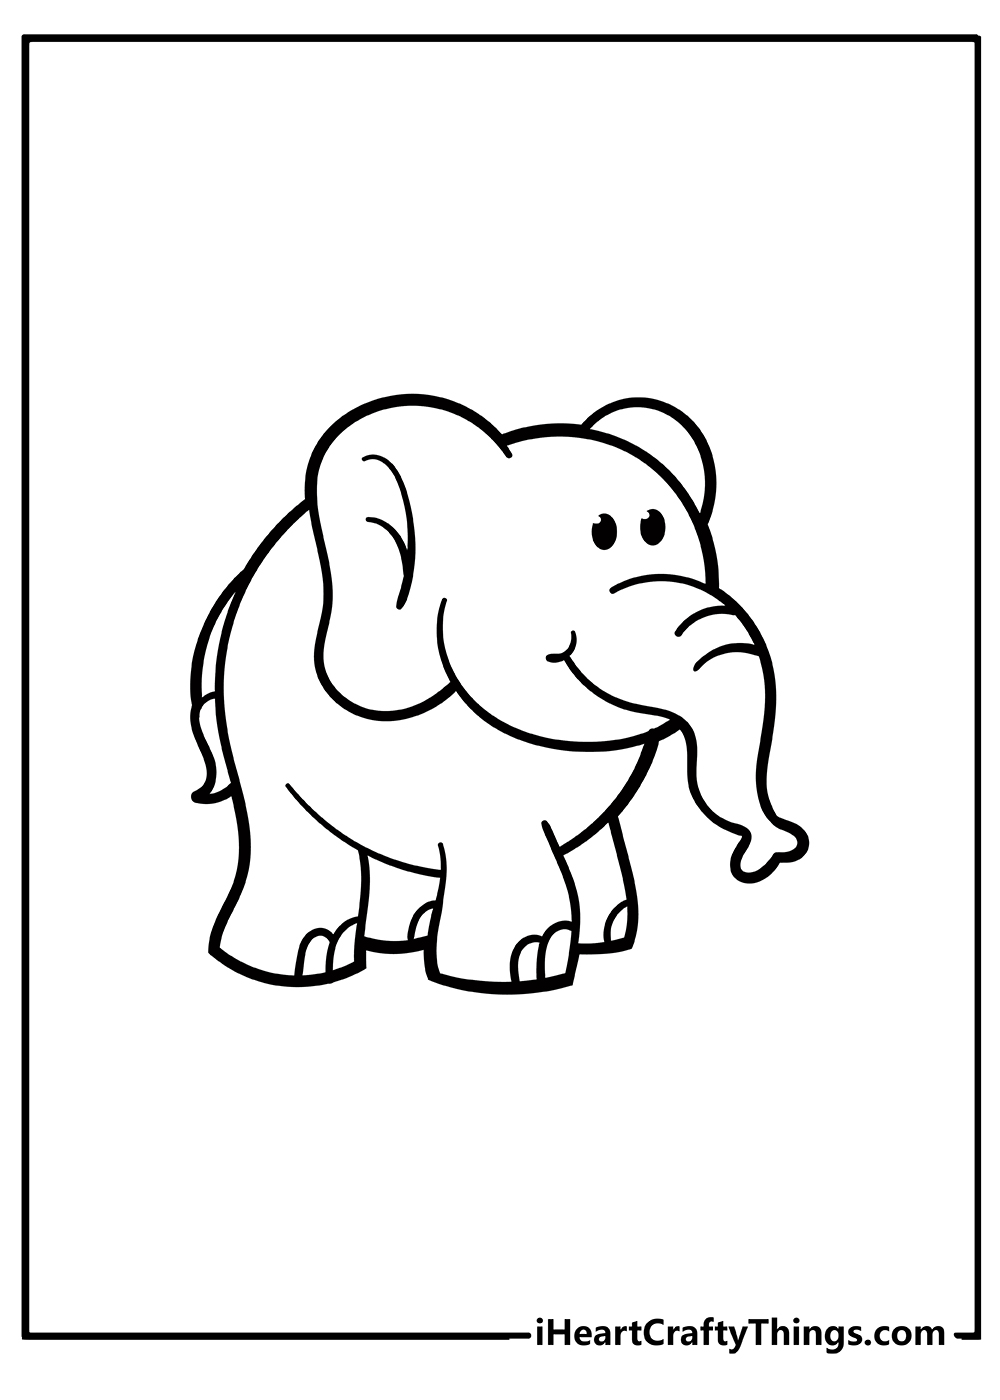 Elephant Coloring Book for adults free download